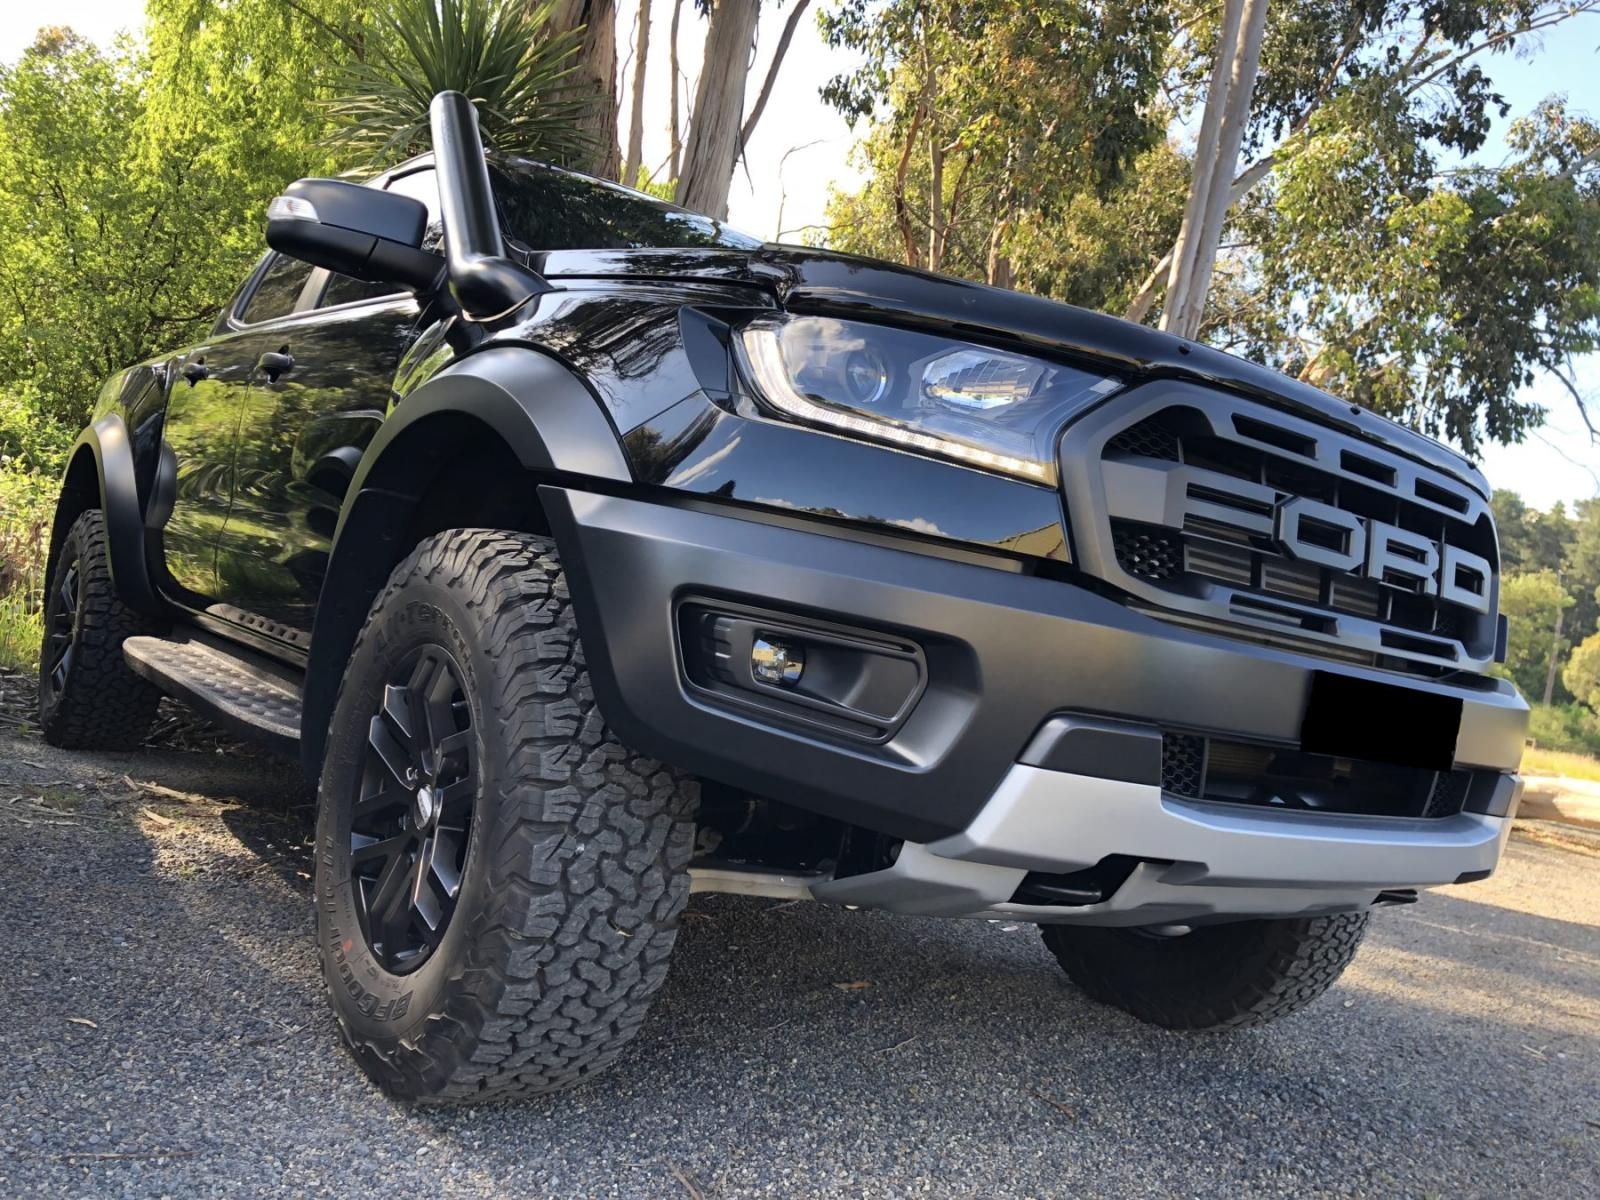 Ford Ranger Modified: Be Creative With Your Ford Truck